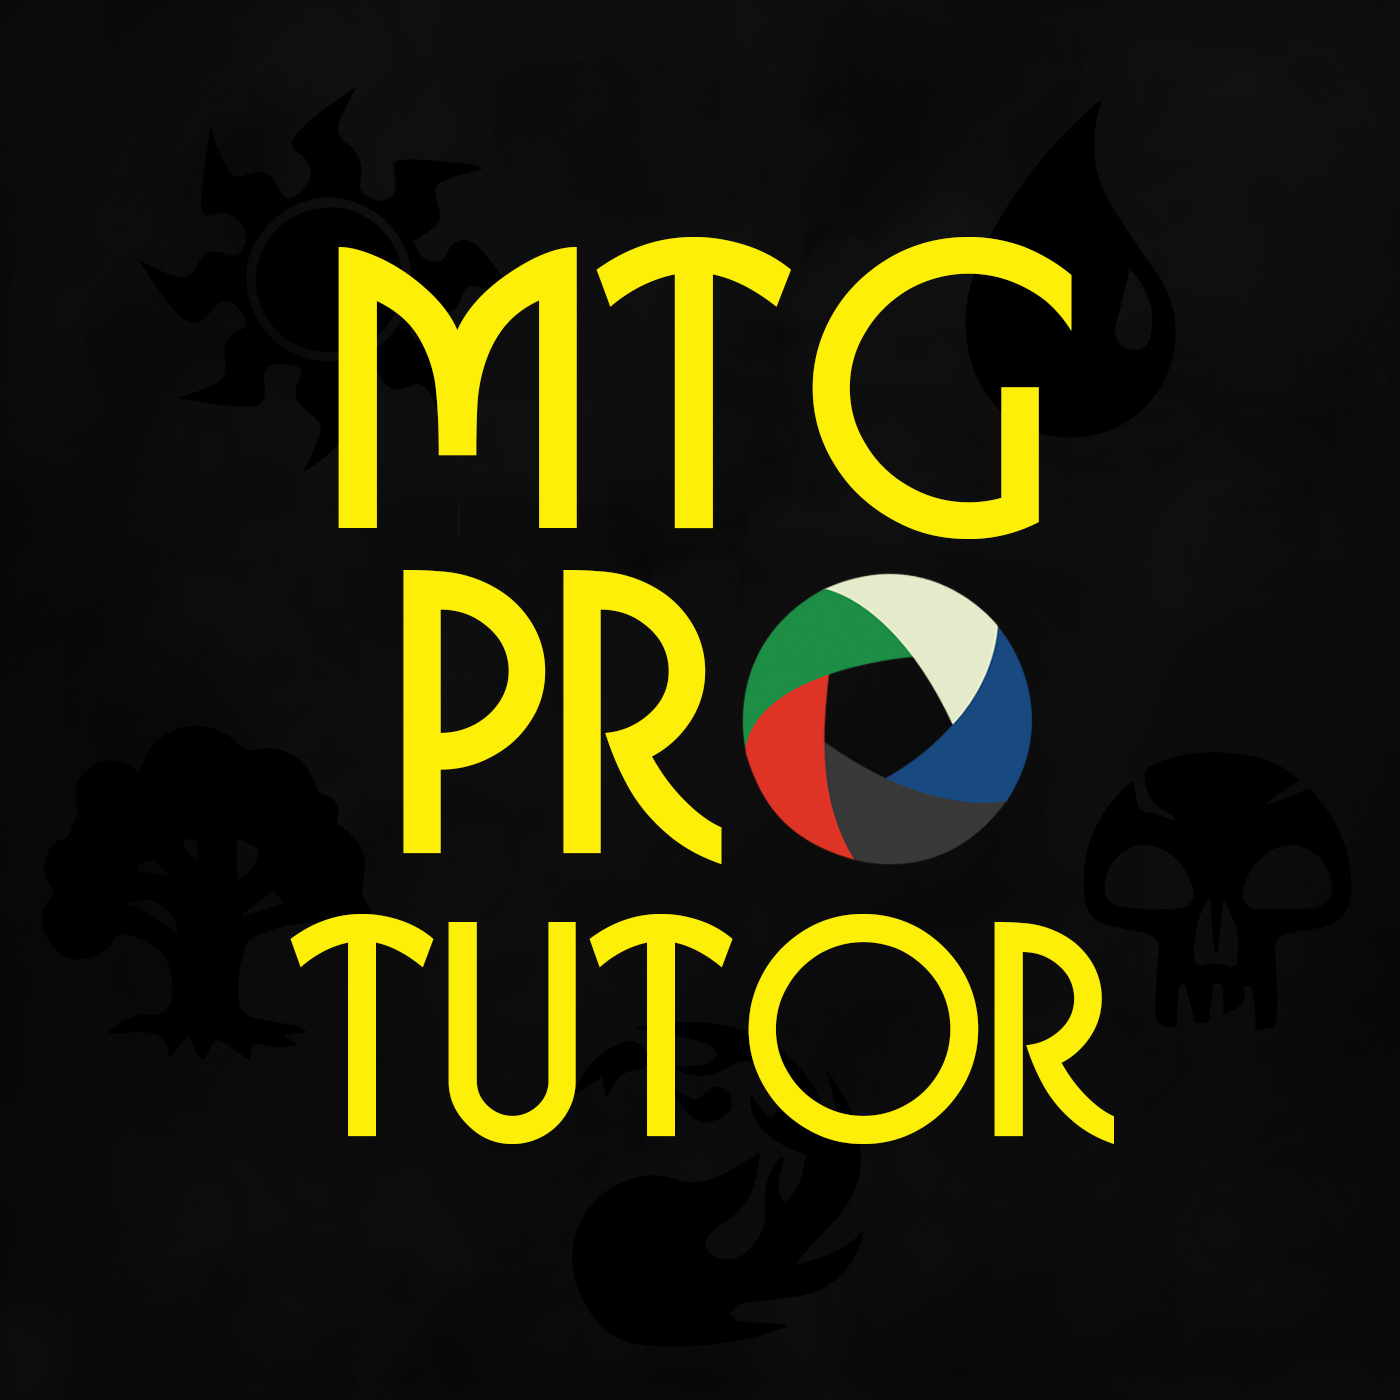 MTG Pro Tutor - Insights, Tips & Advice from Magic: The Gathering Pros